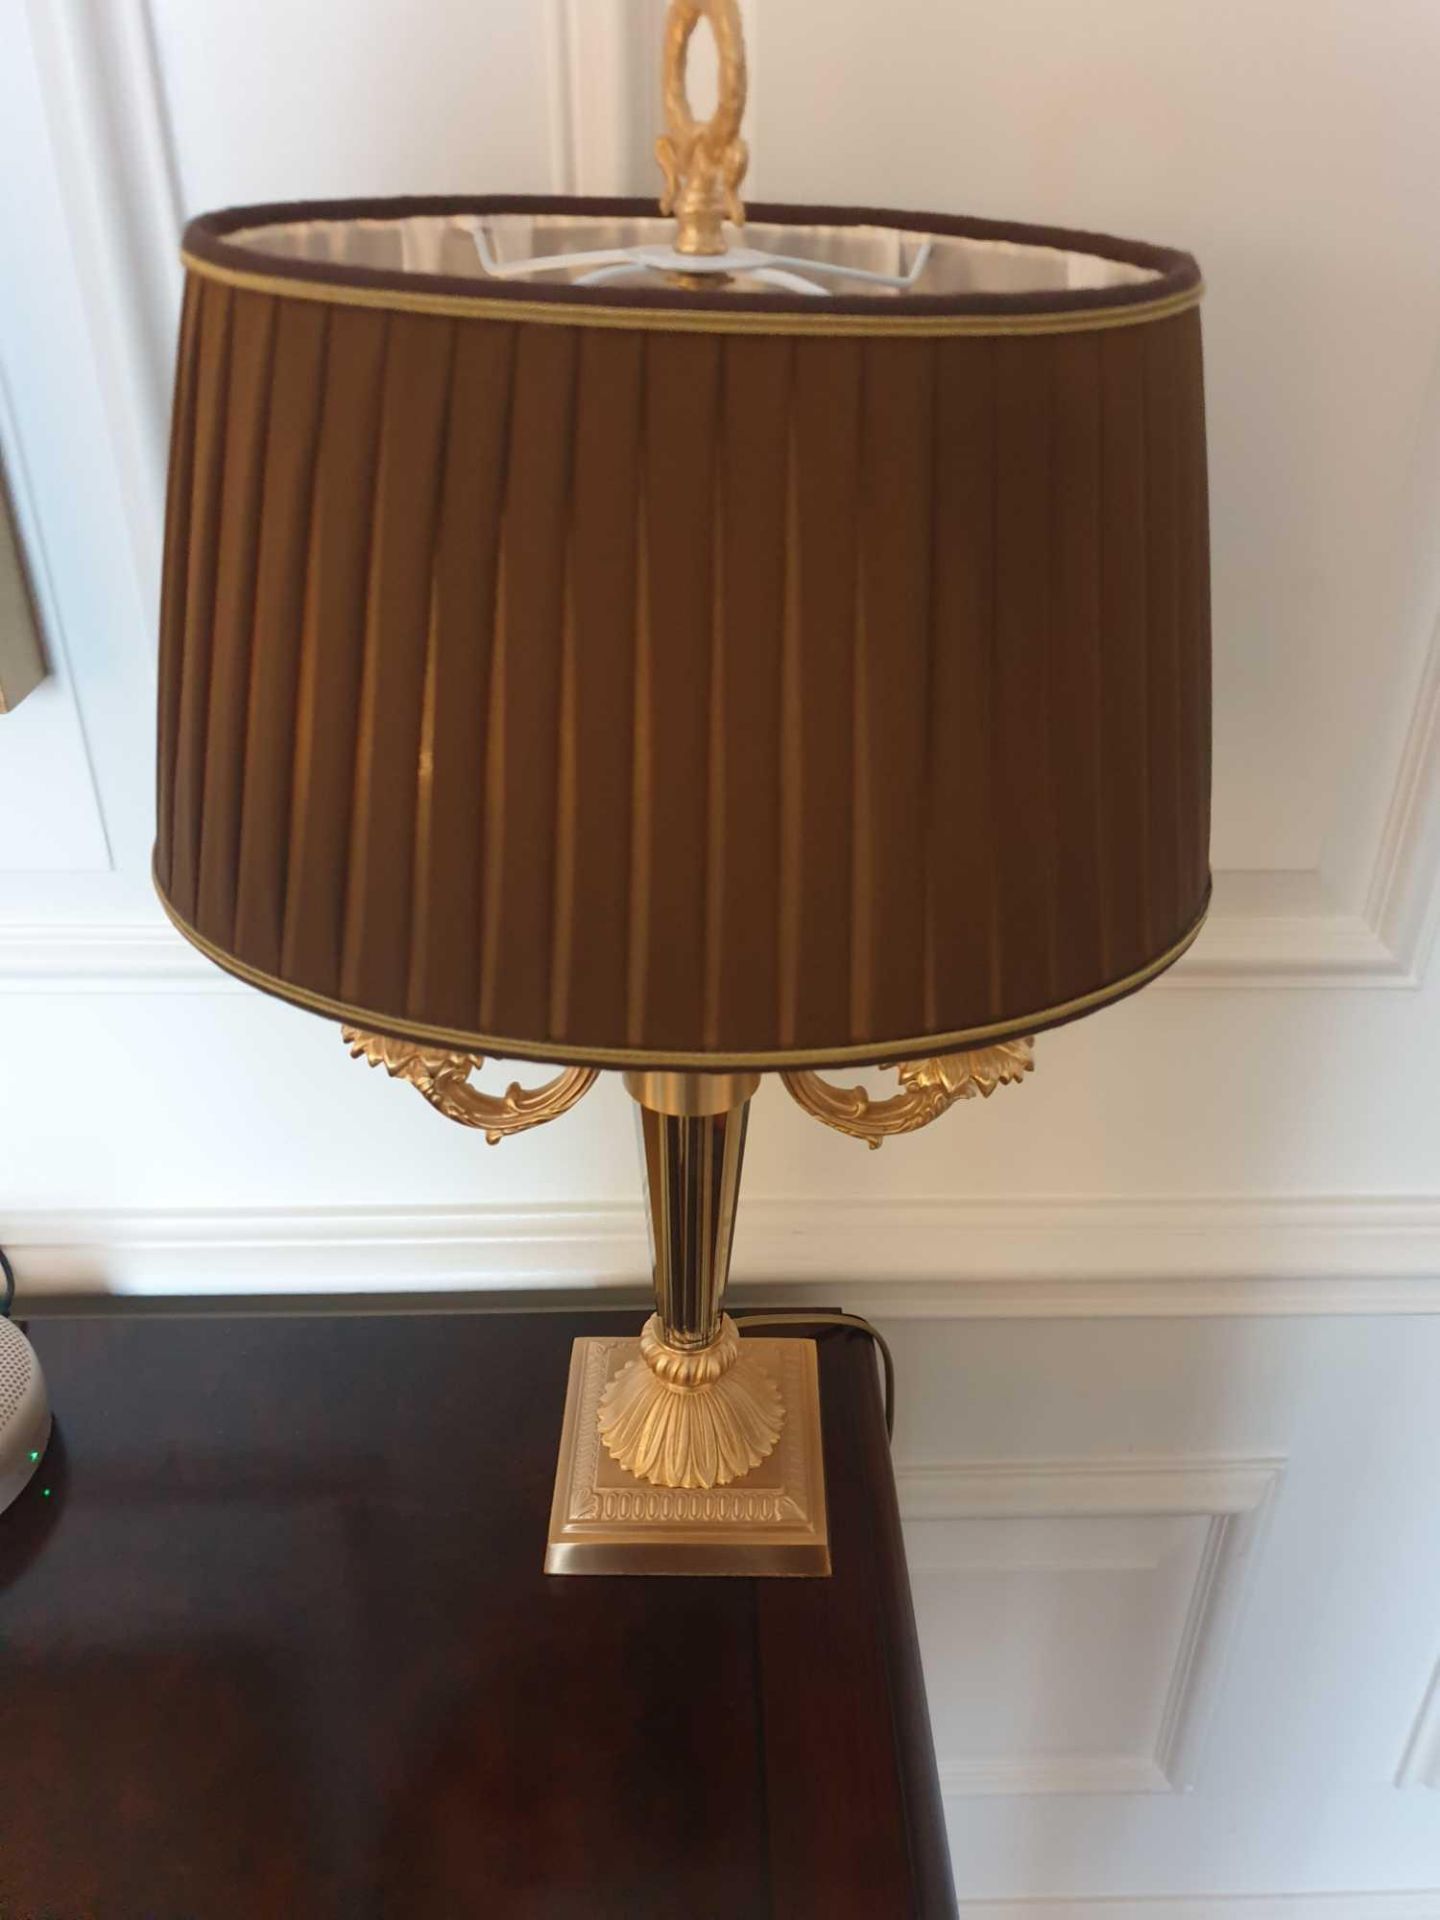 Laudarte Aretusa Twin Arm Table Lamp Bronze Lost-Wax Casting Antique Gilt Bronze Base And Column And